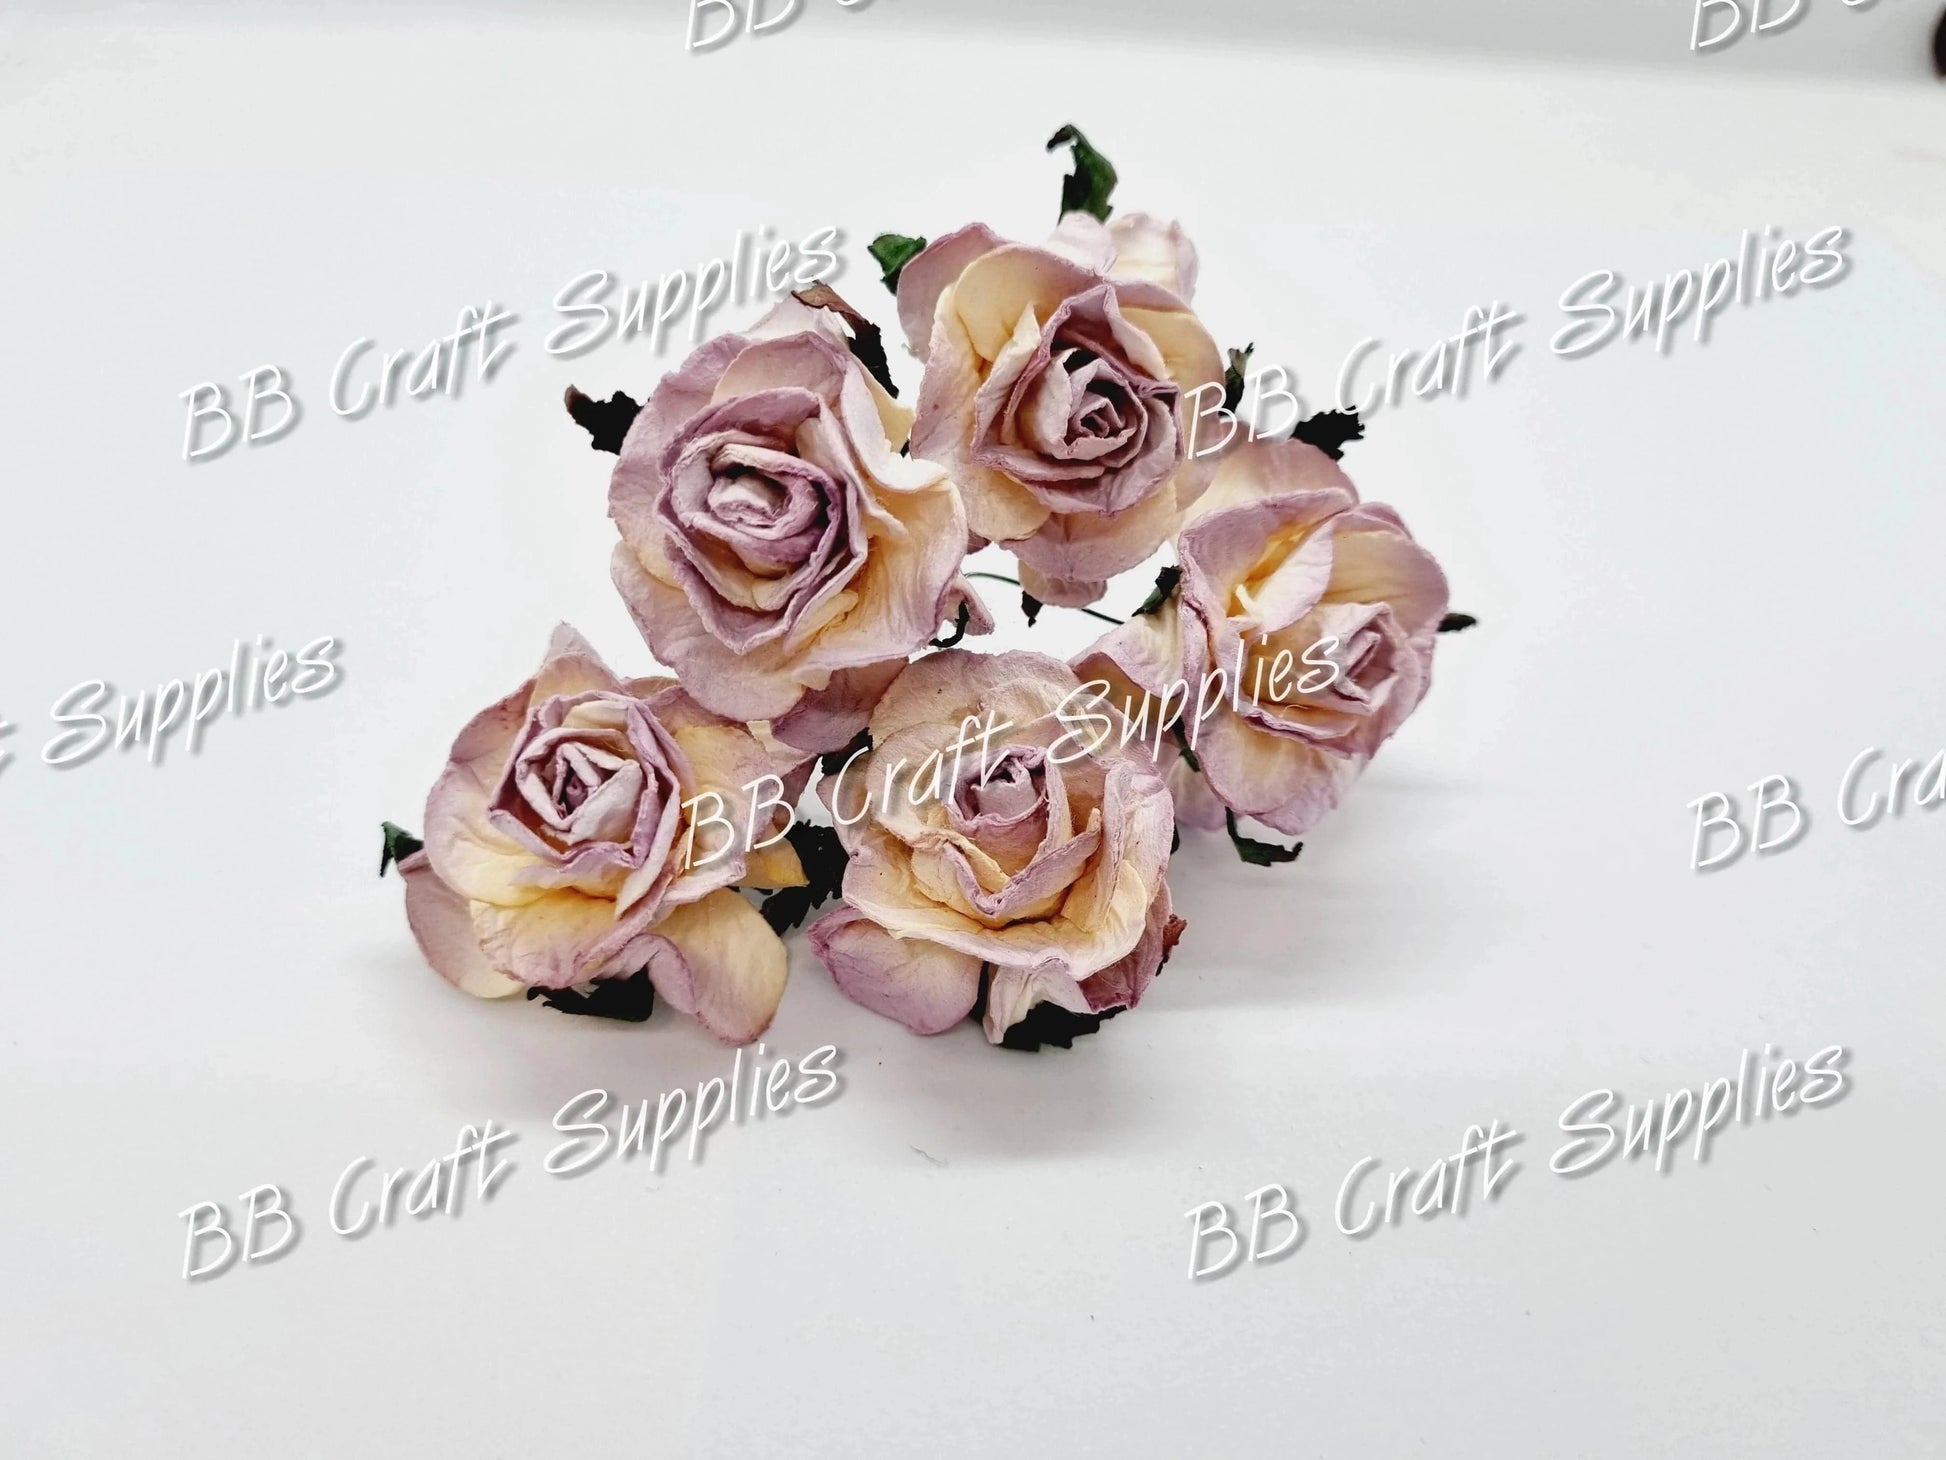 Twist Rose Pale Purple/Ivory tips 5 pack - Burgandy, Embelishment, Flower, Mulburry, mullberry, rose - Bare Butler Faux Leather Supplies 